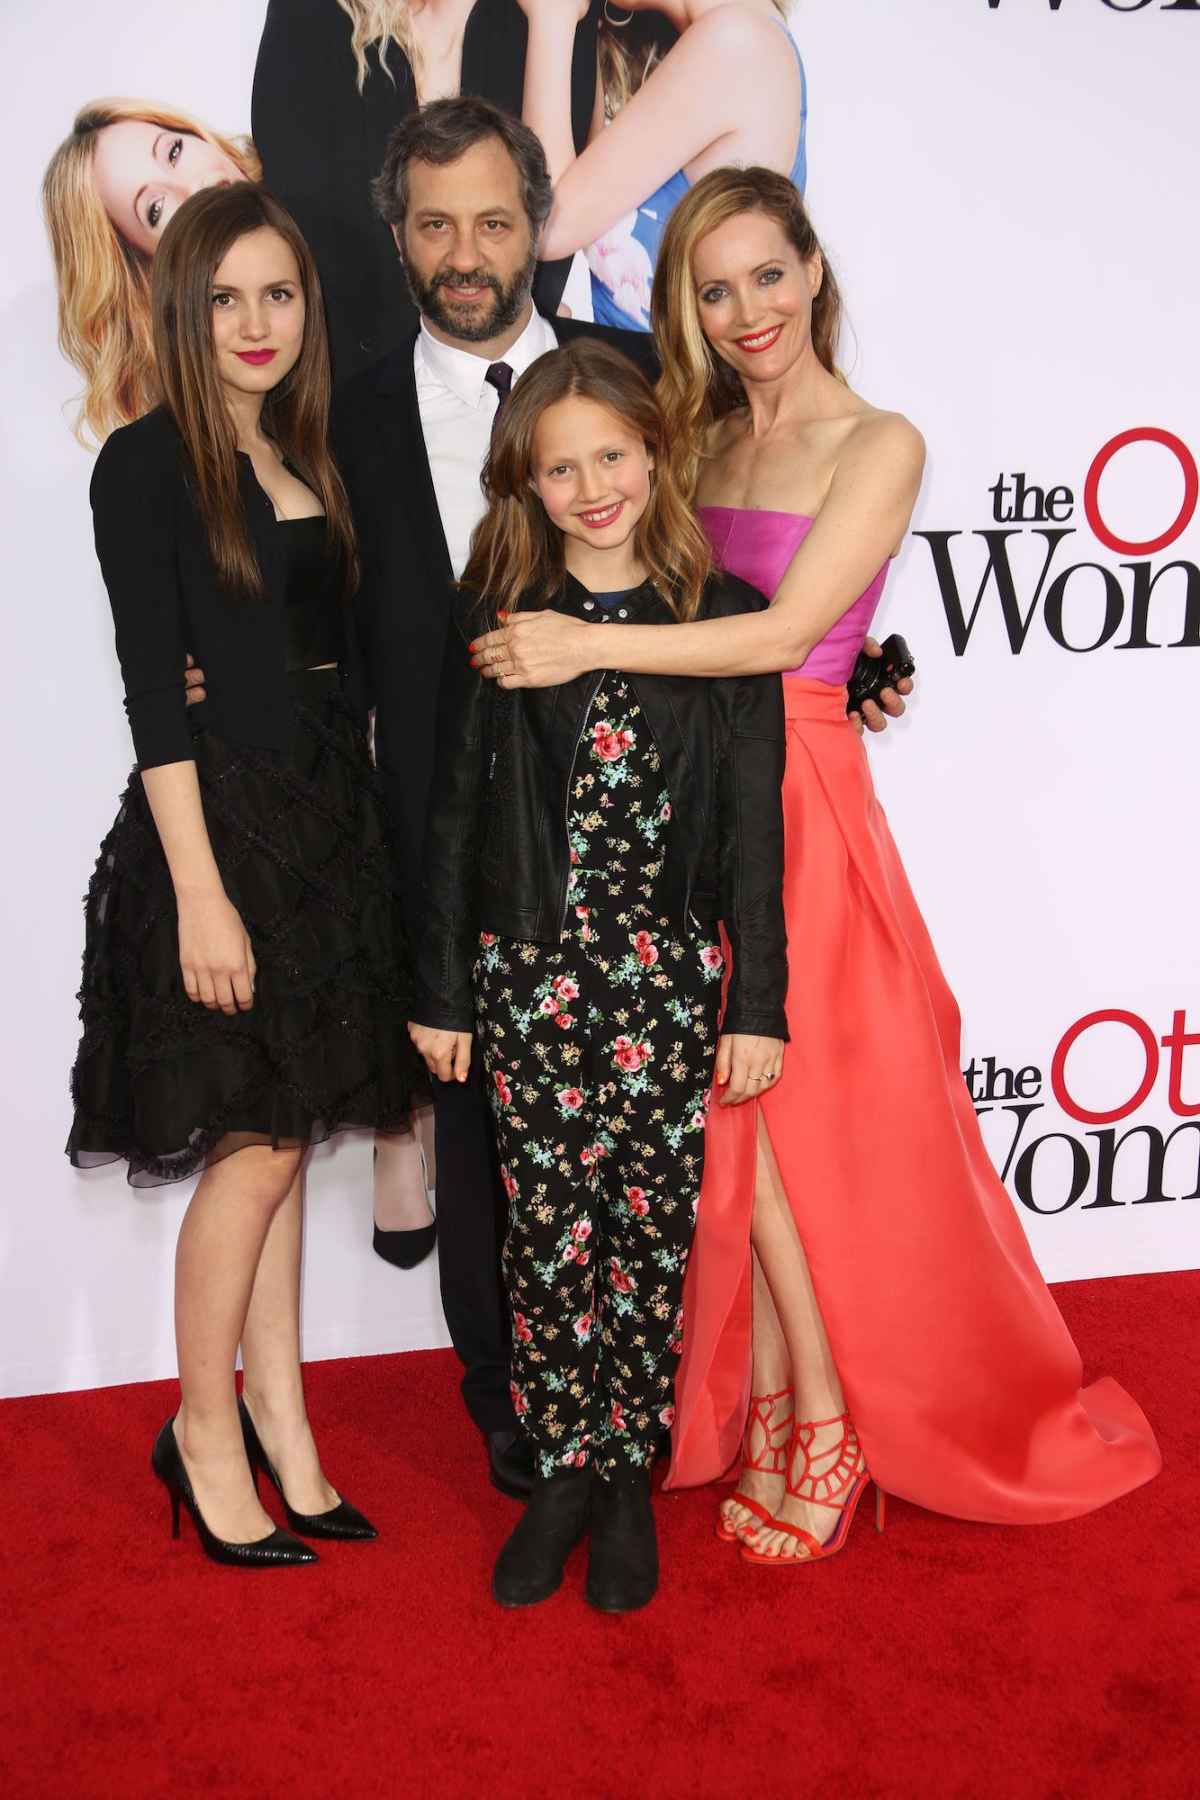 Judd Apatow and Leslie Mann's Daughter Iris Apatow Goes Full Hollywood Glam  in Pink Prom Look